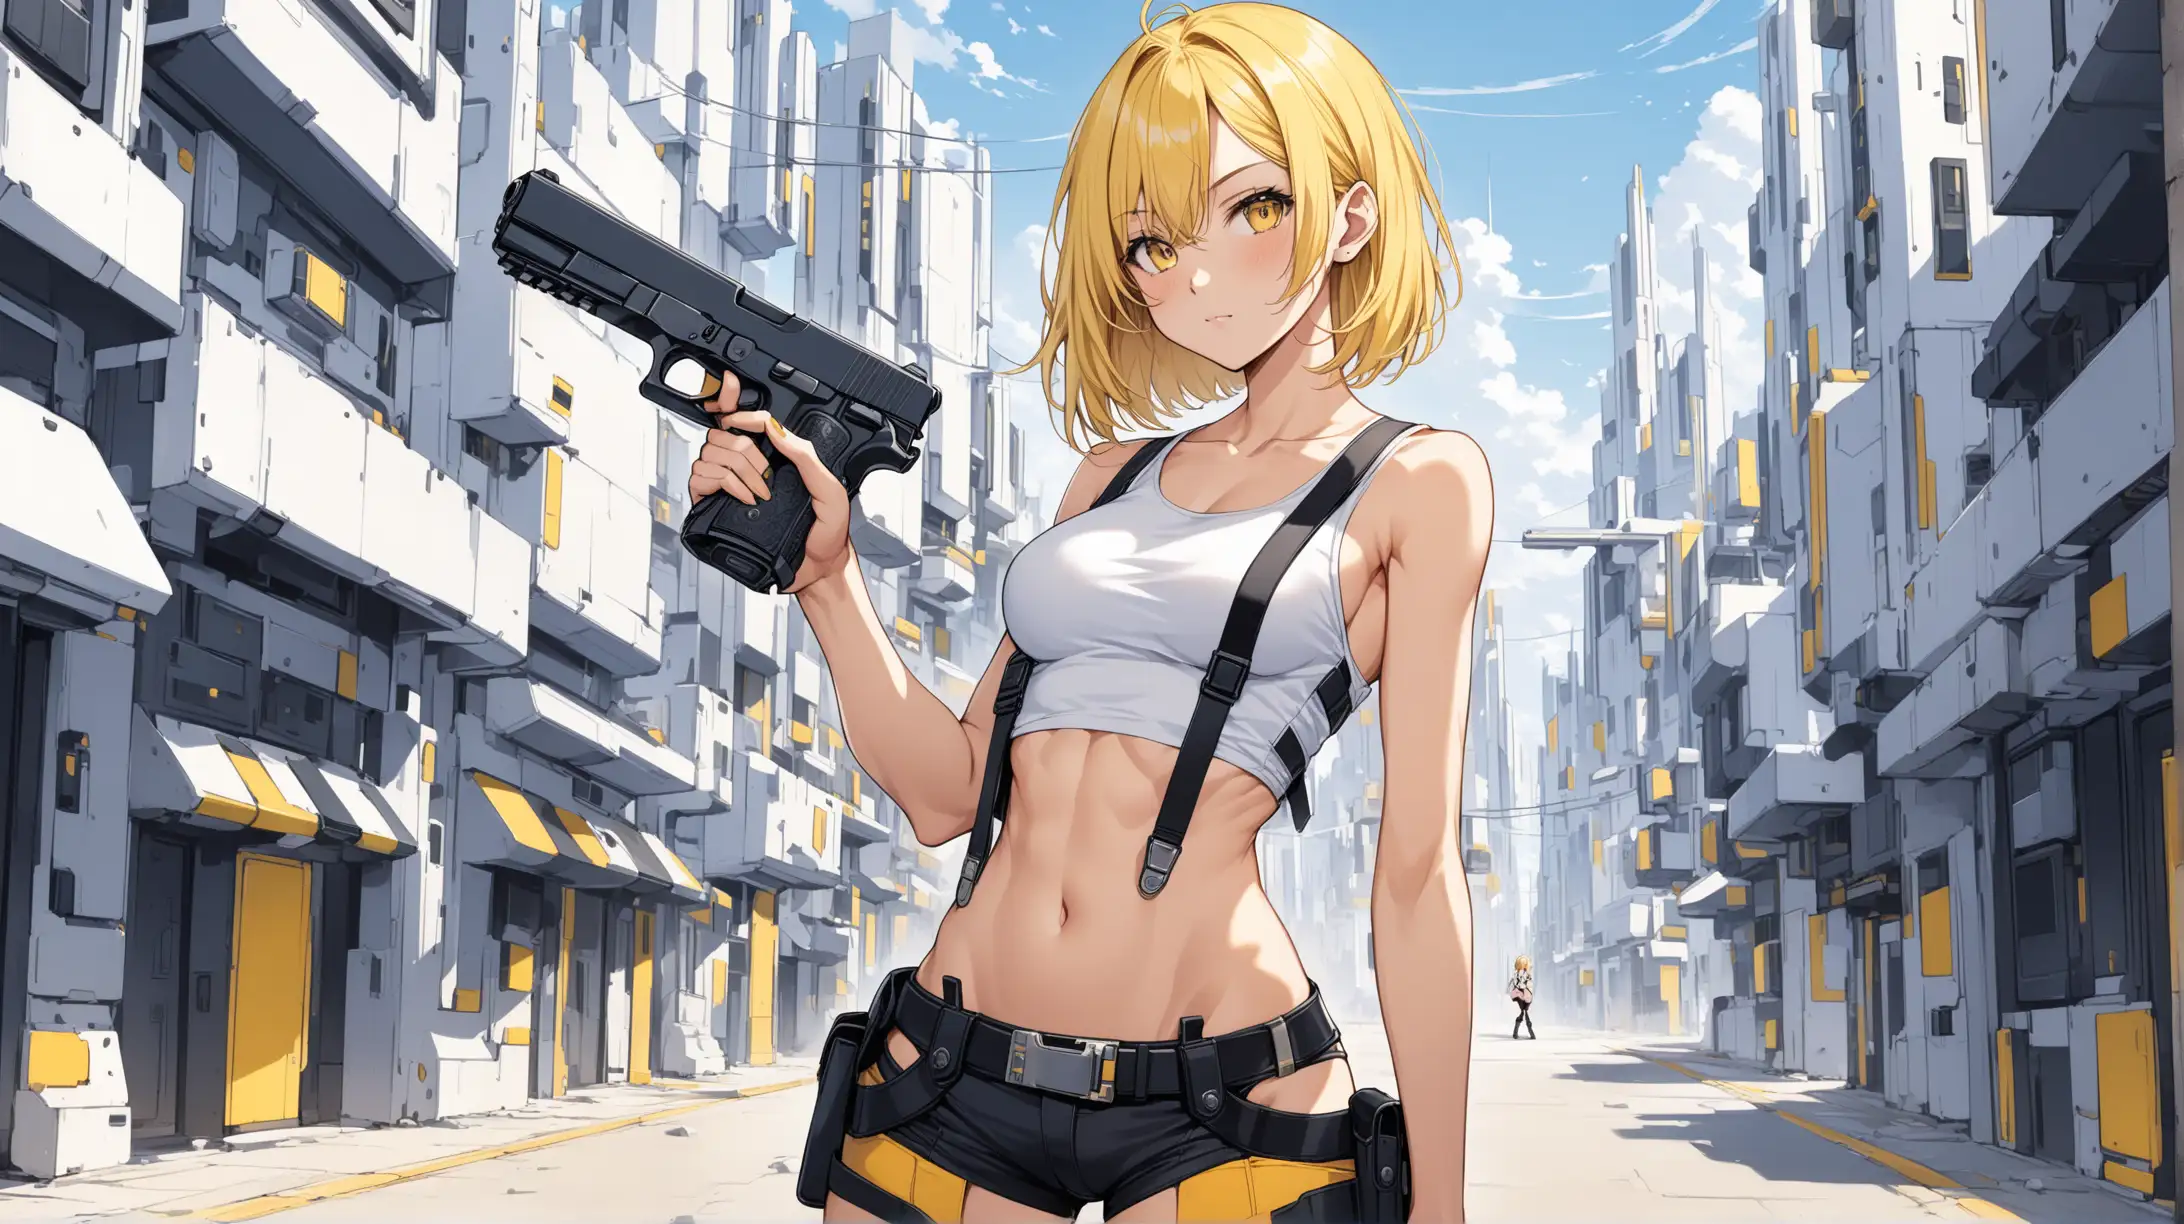 sexy fit 24 year old hero girl, short chin length yellow hair, posing with handguns in futuristic town, super skinny toned body, short white tank top, sexy midriff, wearing suspenders, holsters on each thigh, combat boots, yellow black white 3 color minimal design